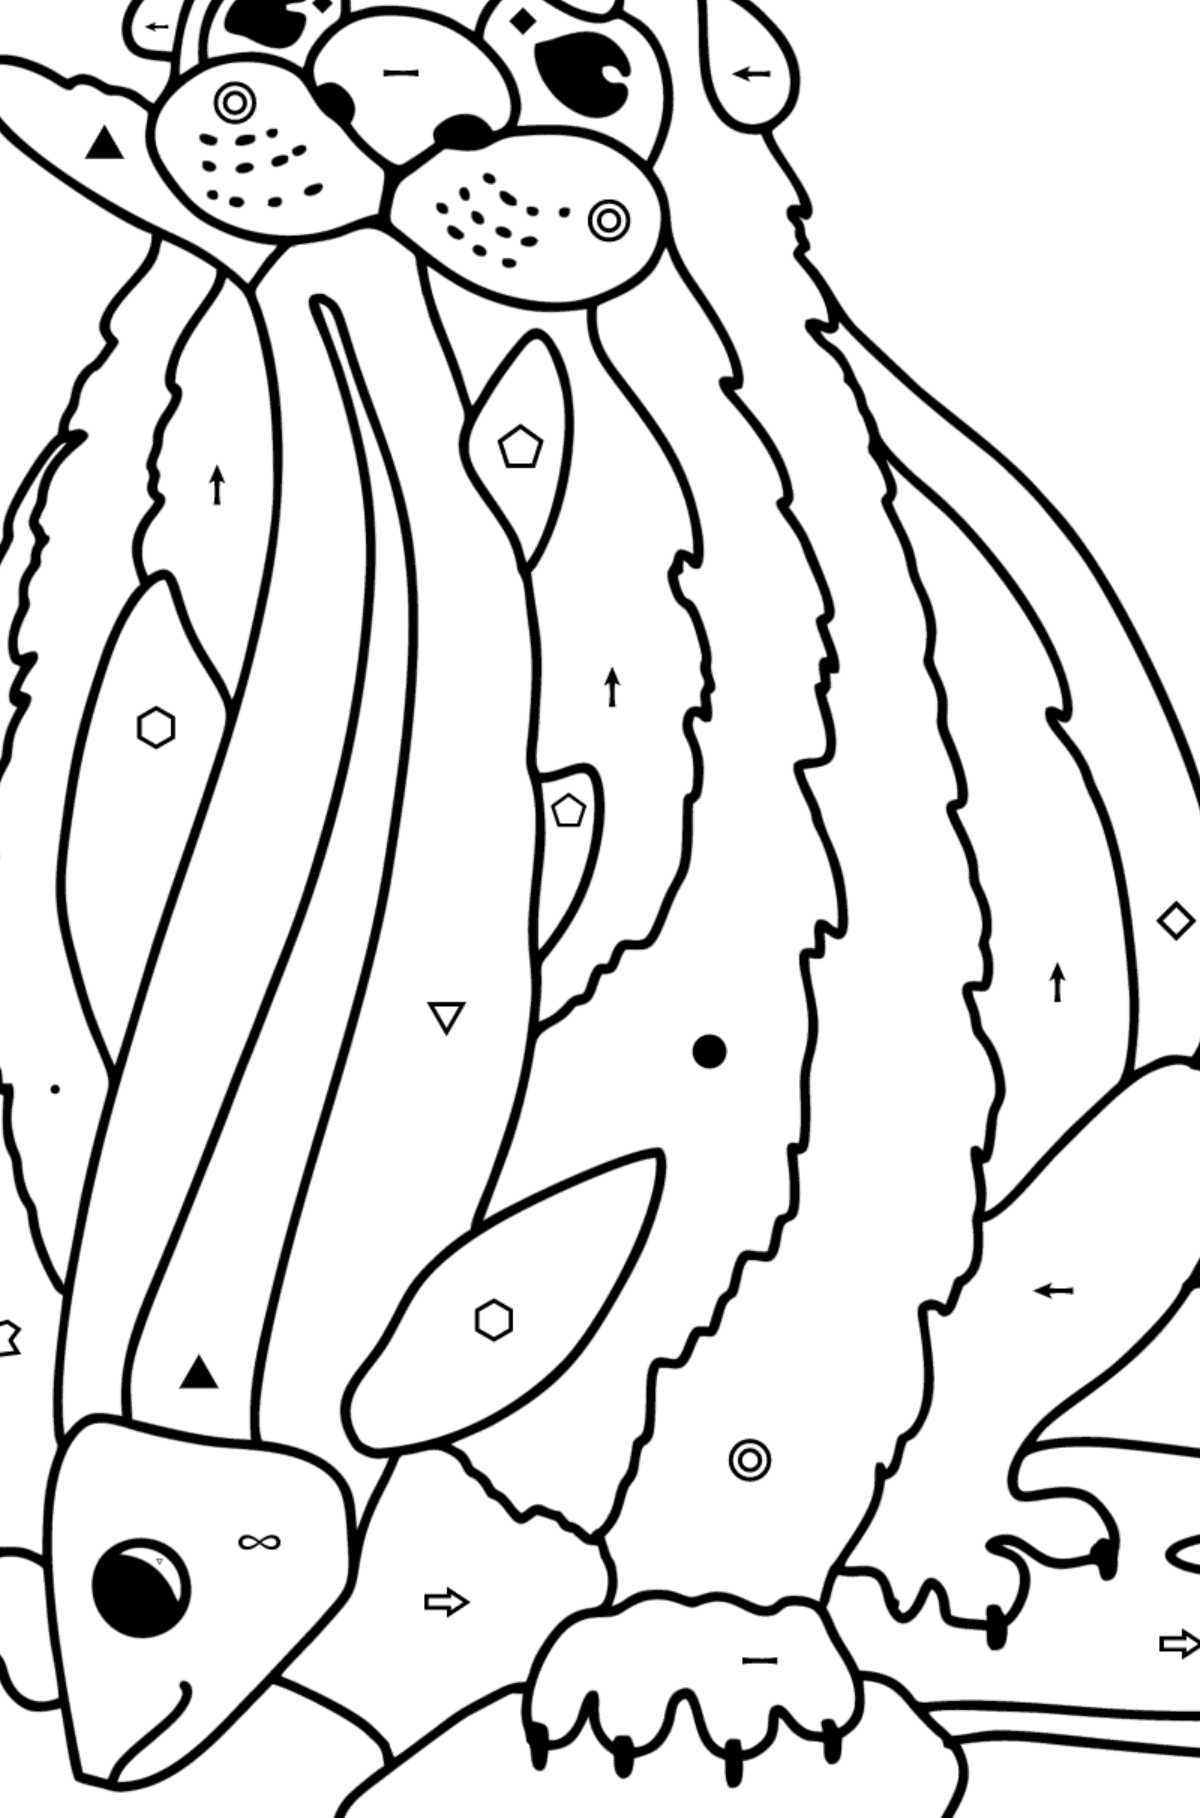 Sea Otter coloring page - Coloring by Symbols and Geometric Shapes for Kids